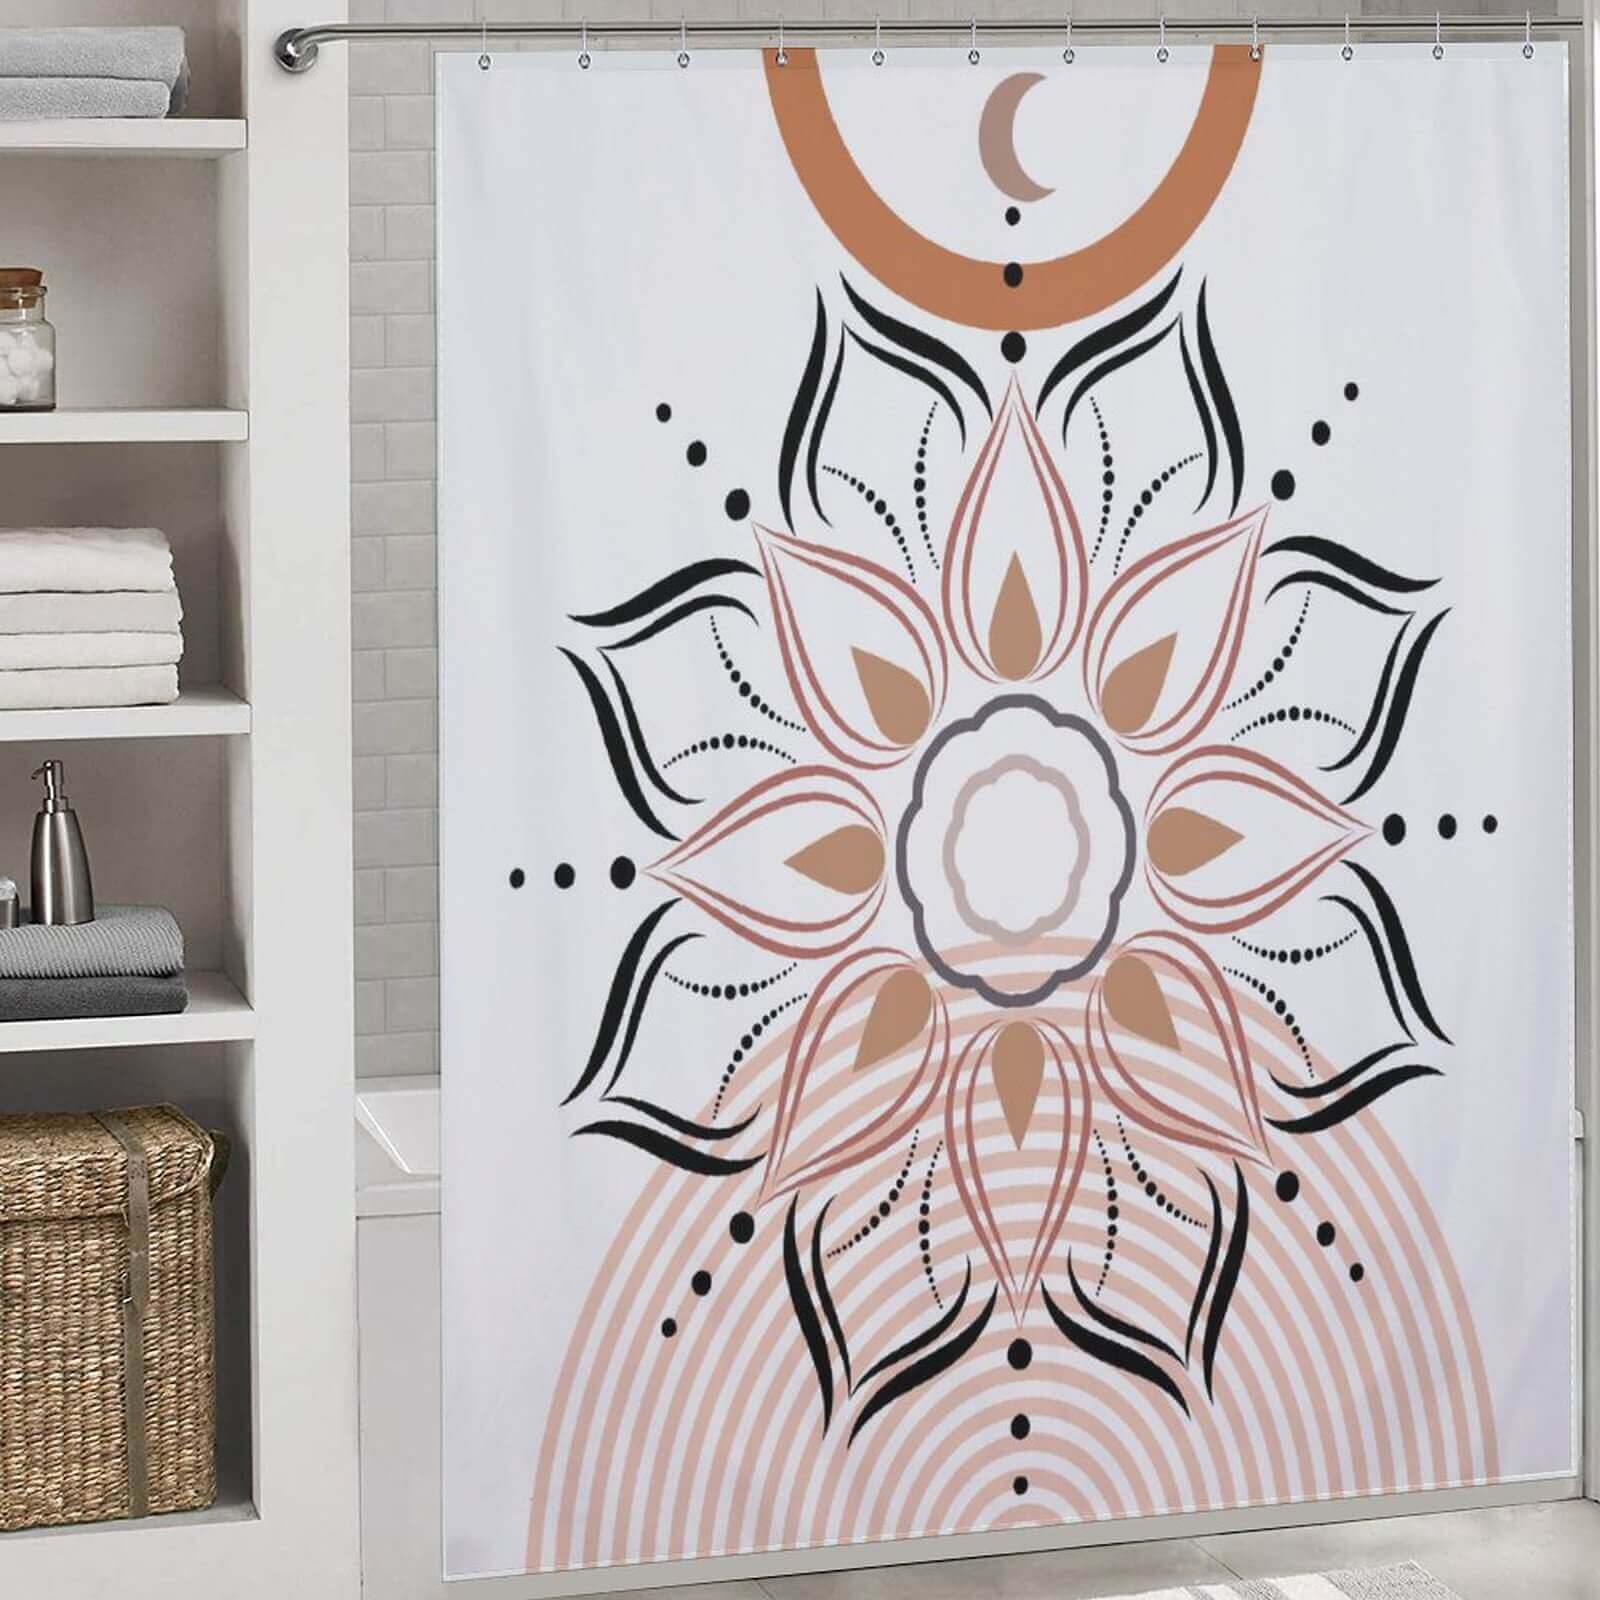 A bathroom with a Cotton Cat shower curtain adorned with an abstract design, adding a touch of Boho Mandala-inspired bathroom decor.